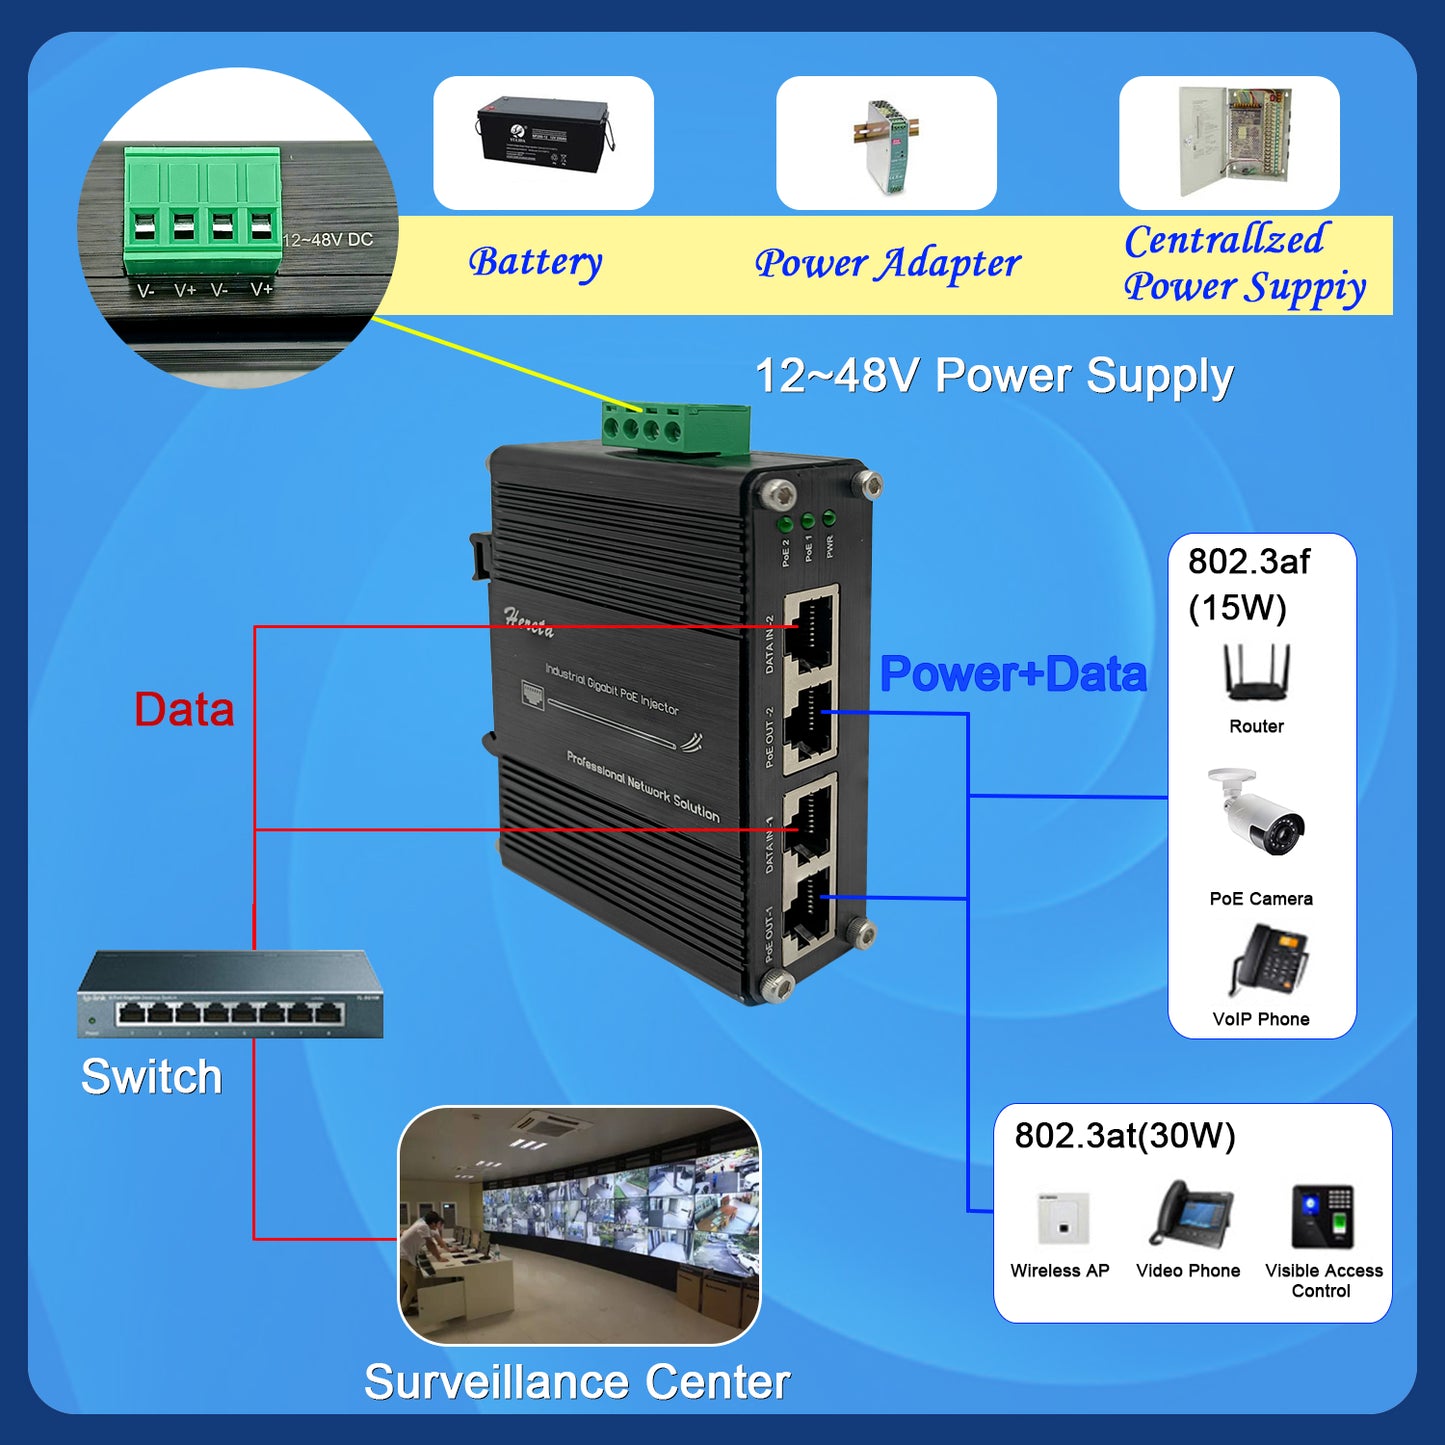 2 Ports Hardened Industrial Gigabit PoE+ Injector 12~48VDC Power Input Support IEEE802.3af/at PoE Device Support 10/100/1000Base-T and Compliant with IEEE 802.3ab